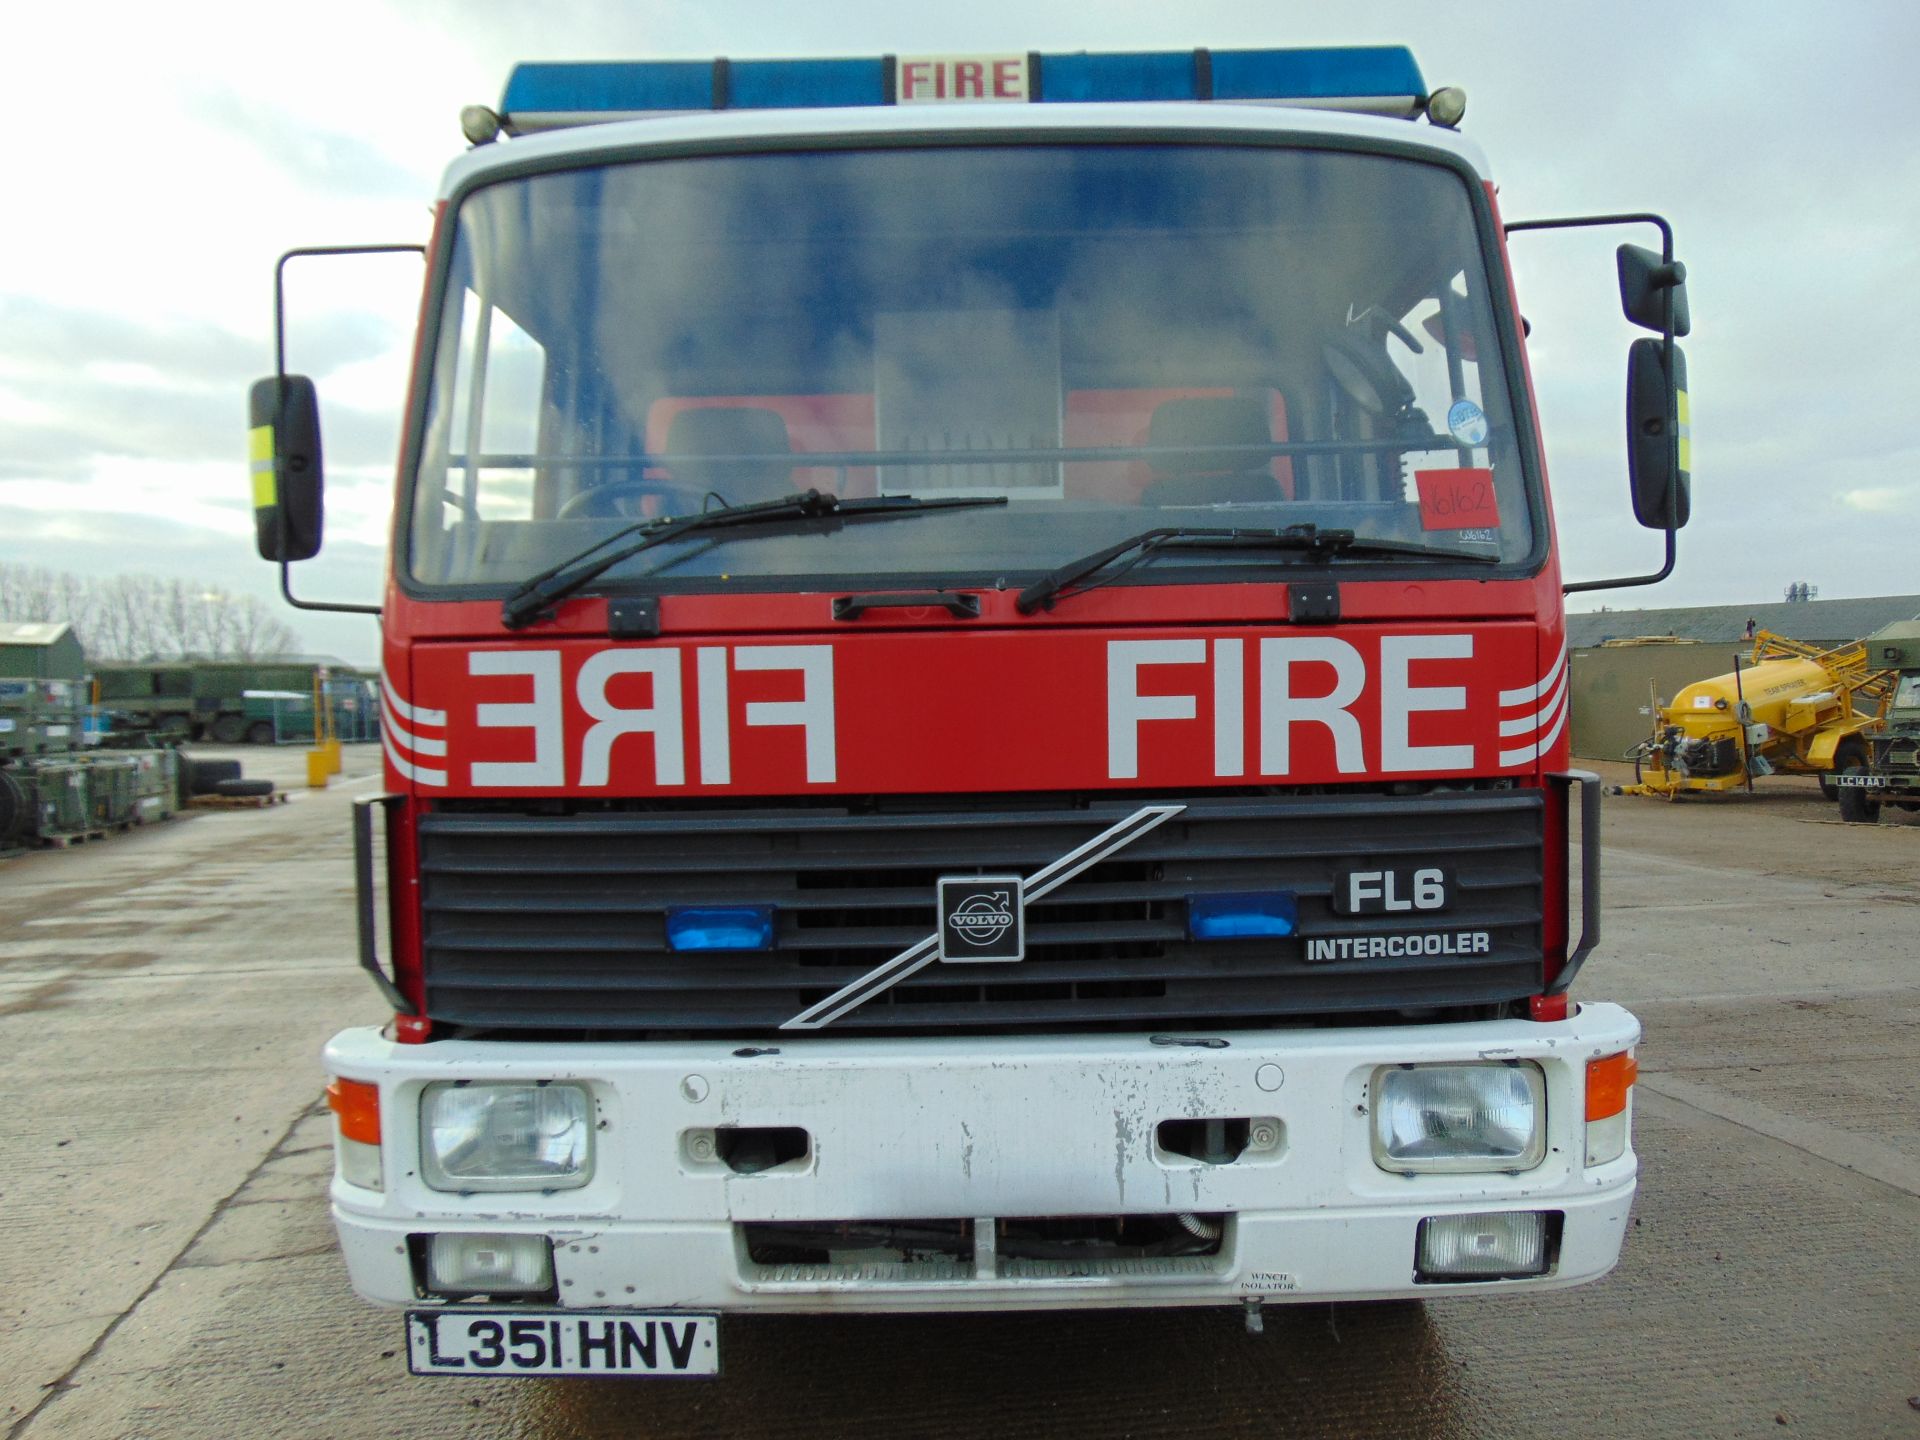 1993 Volvo FL6 18 4 x 2 Incident Response Unit complete with a 1000 Kg Tail Lift - Image 2 of 37